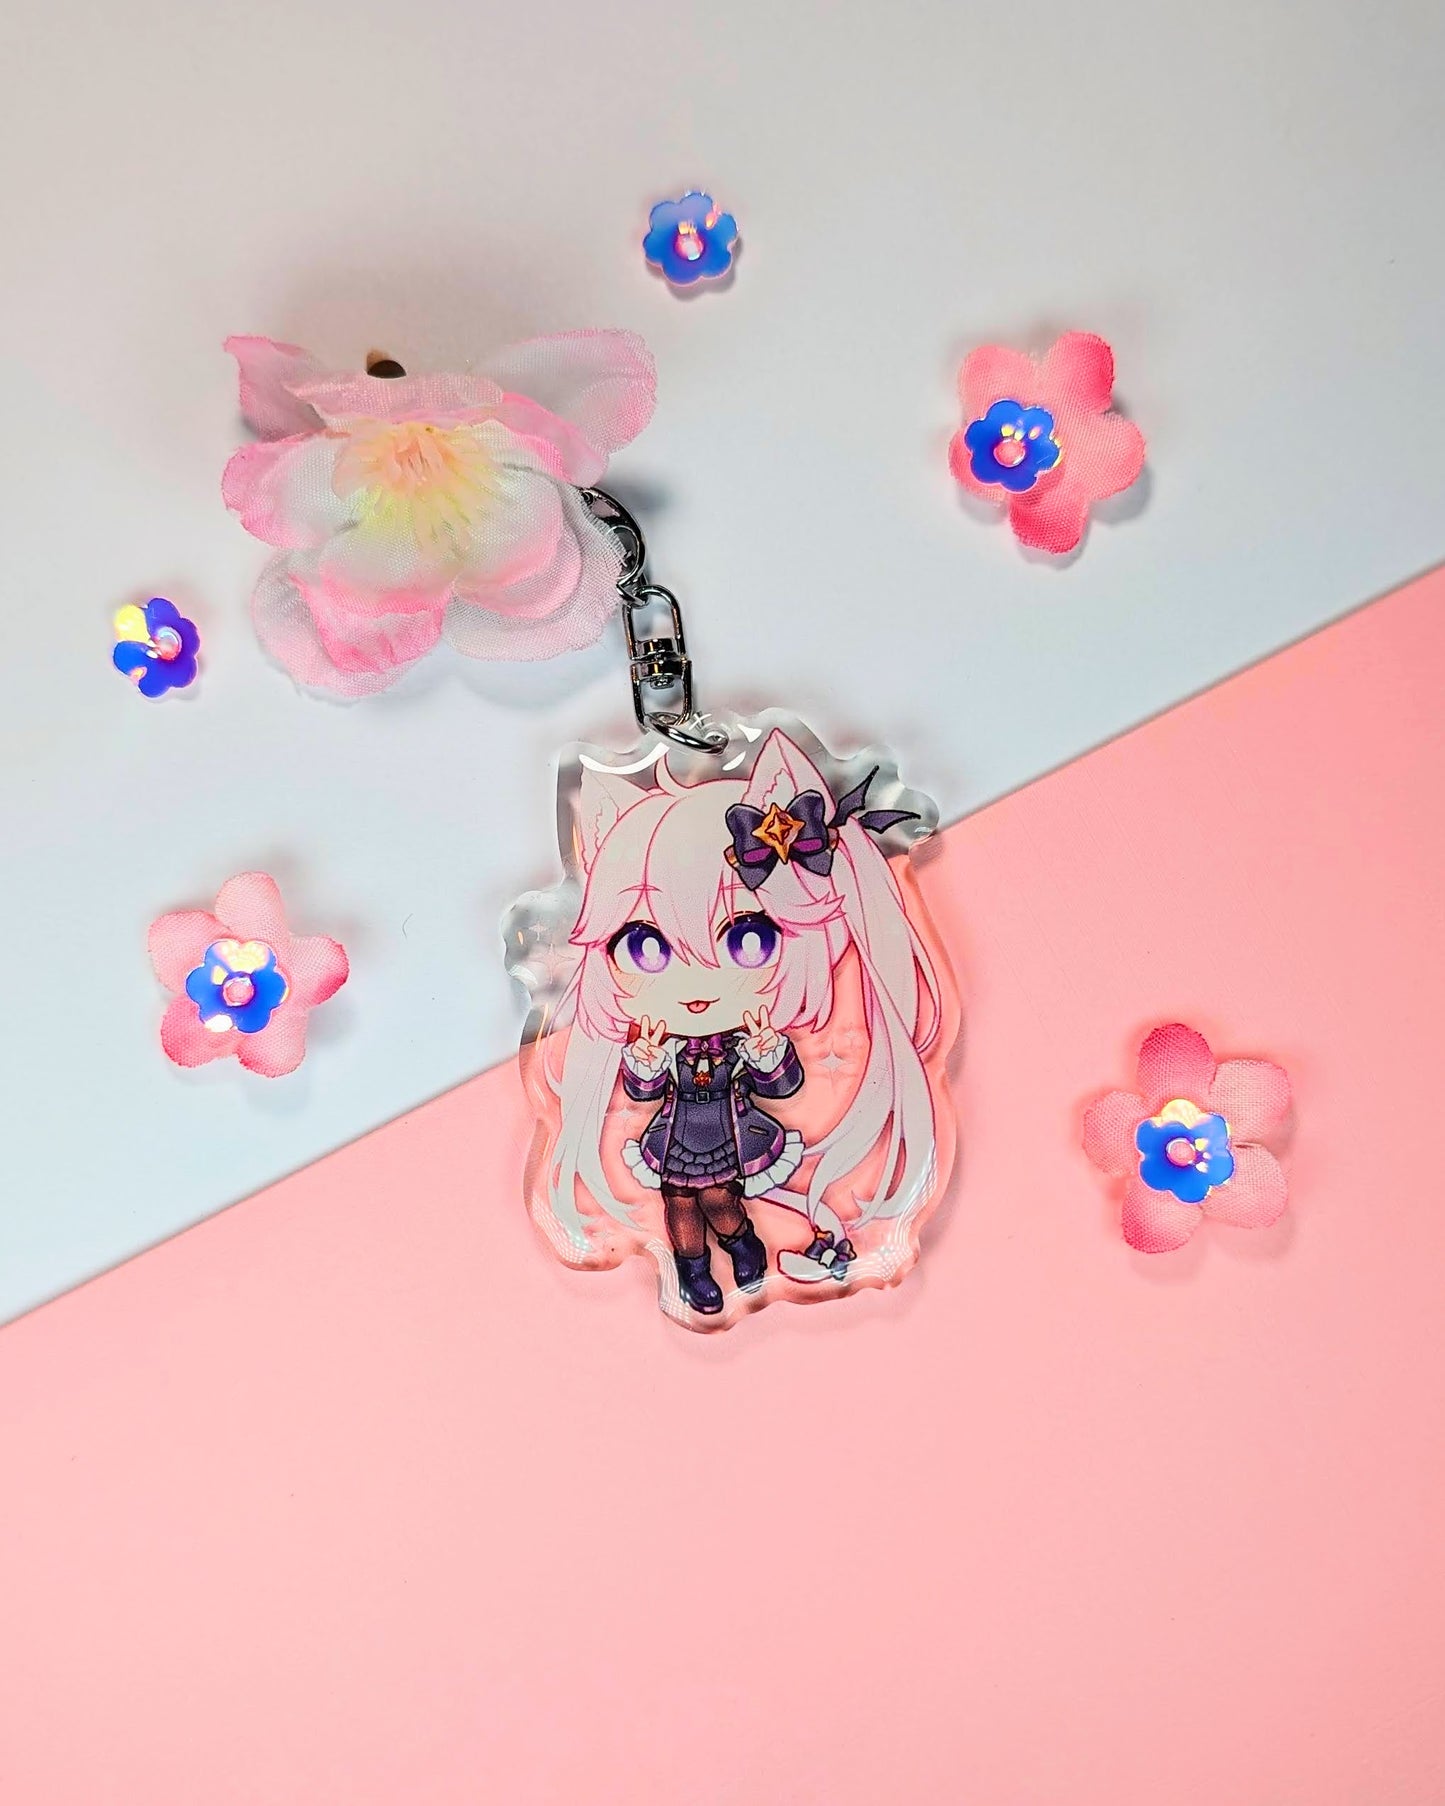 2022 Nyanners |Keychain - r0cketcat Illustrations